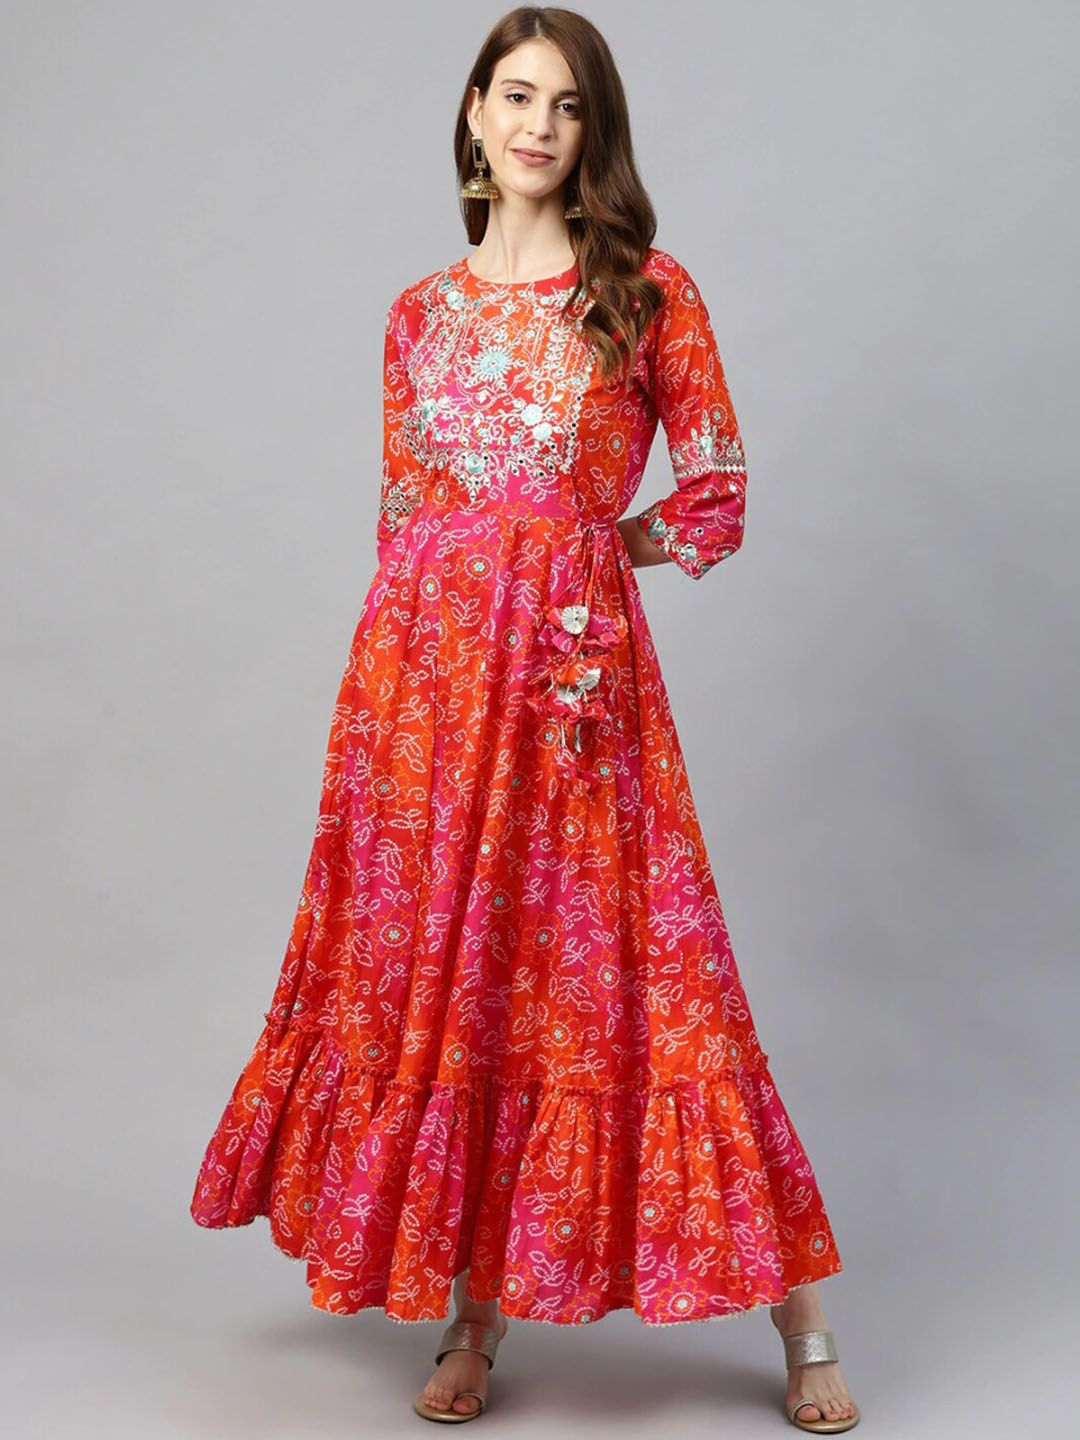 Ishin Red Embellished Maxi Dress Price in India